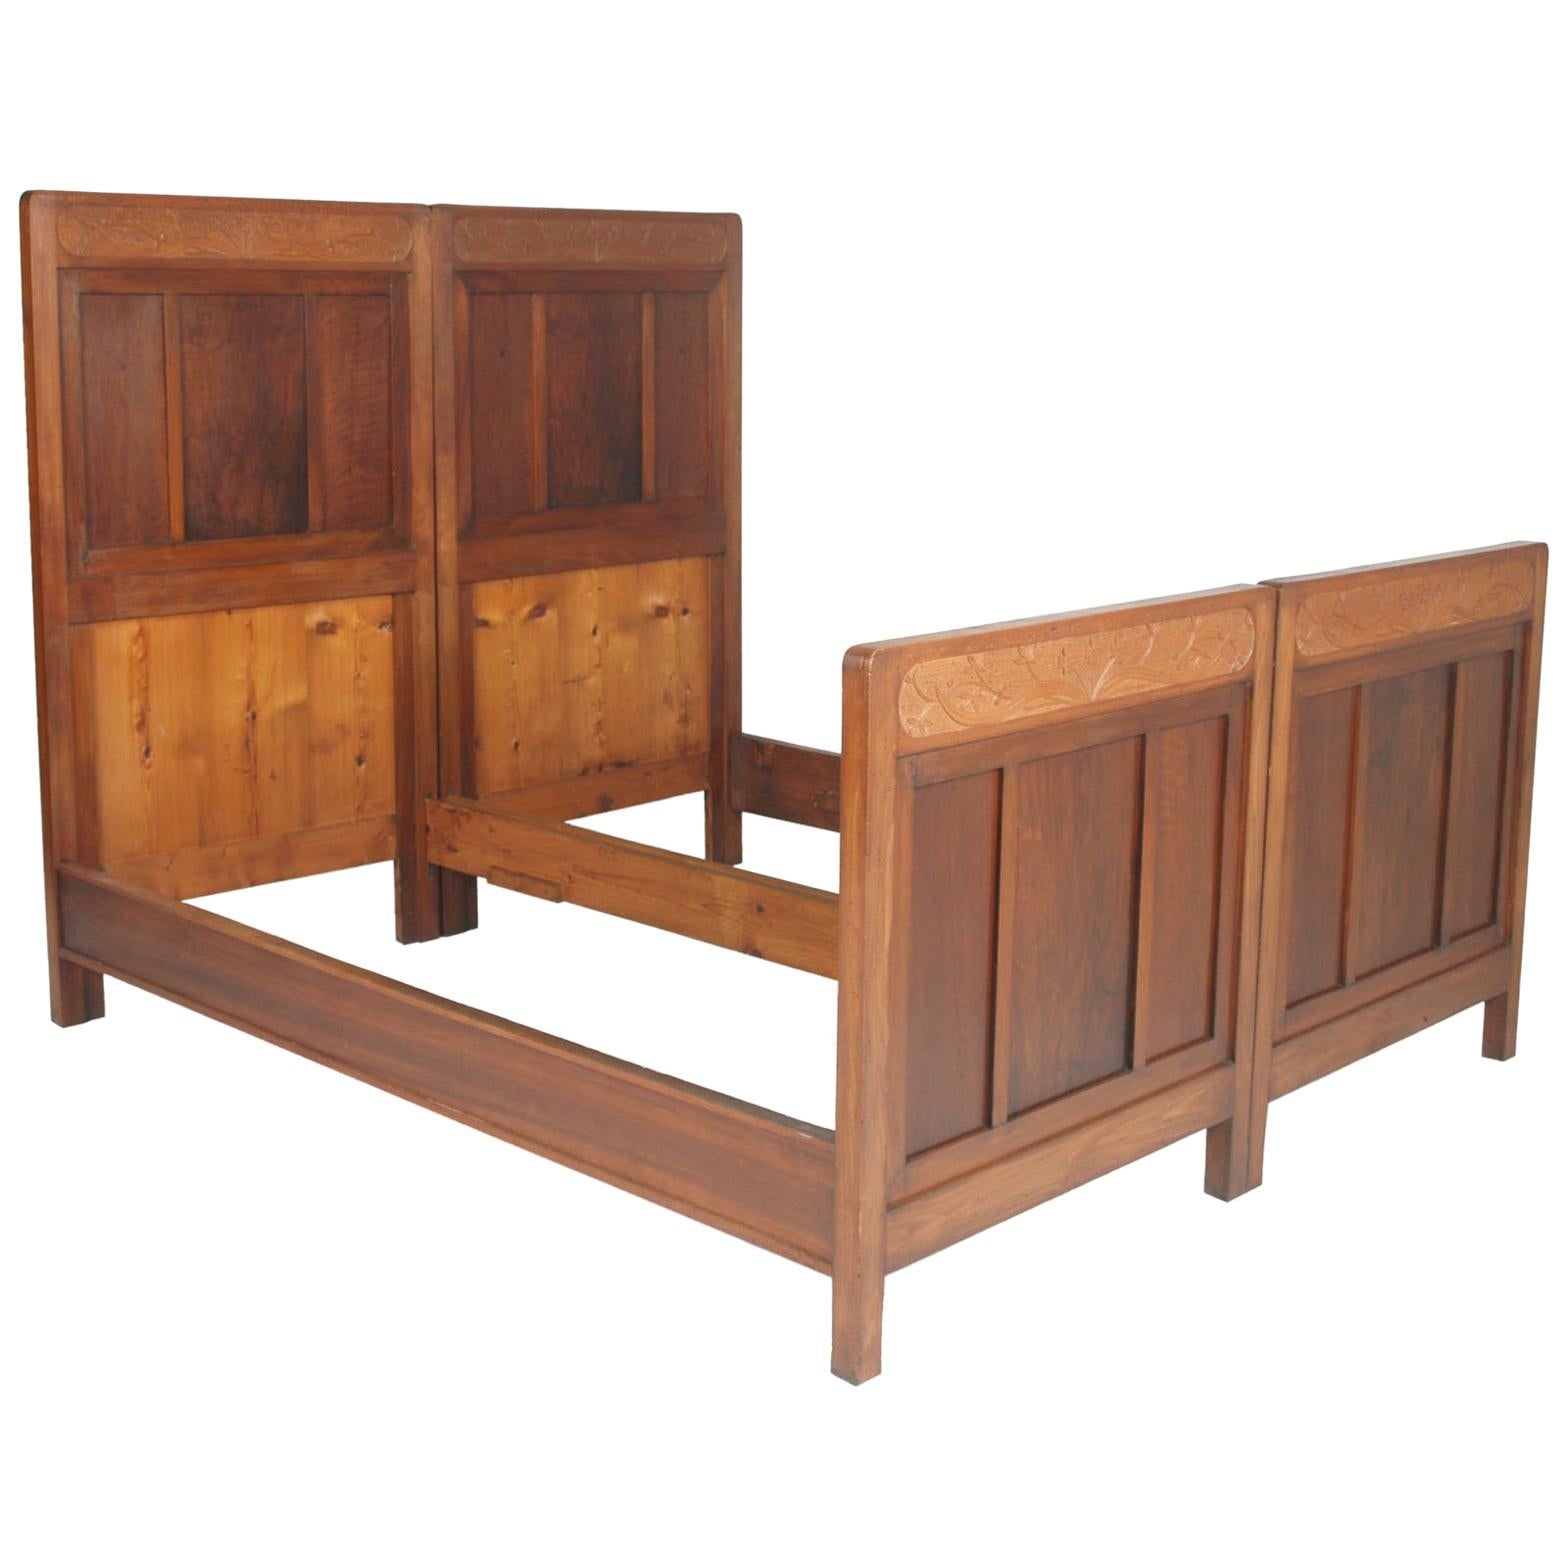 Antique Double Twin Bed, Art Nouveau, in Hand Carved Cherry Wood, Wax Polished For Sale